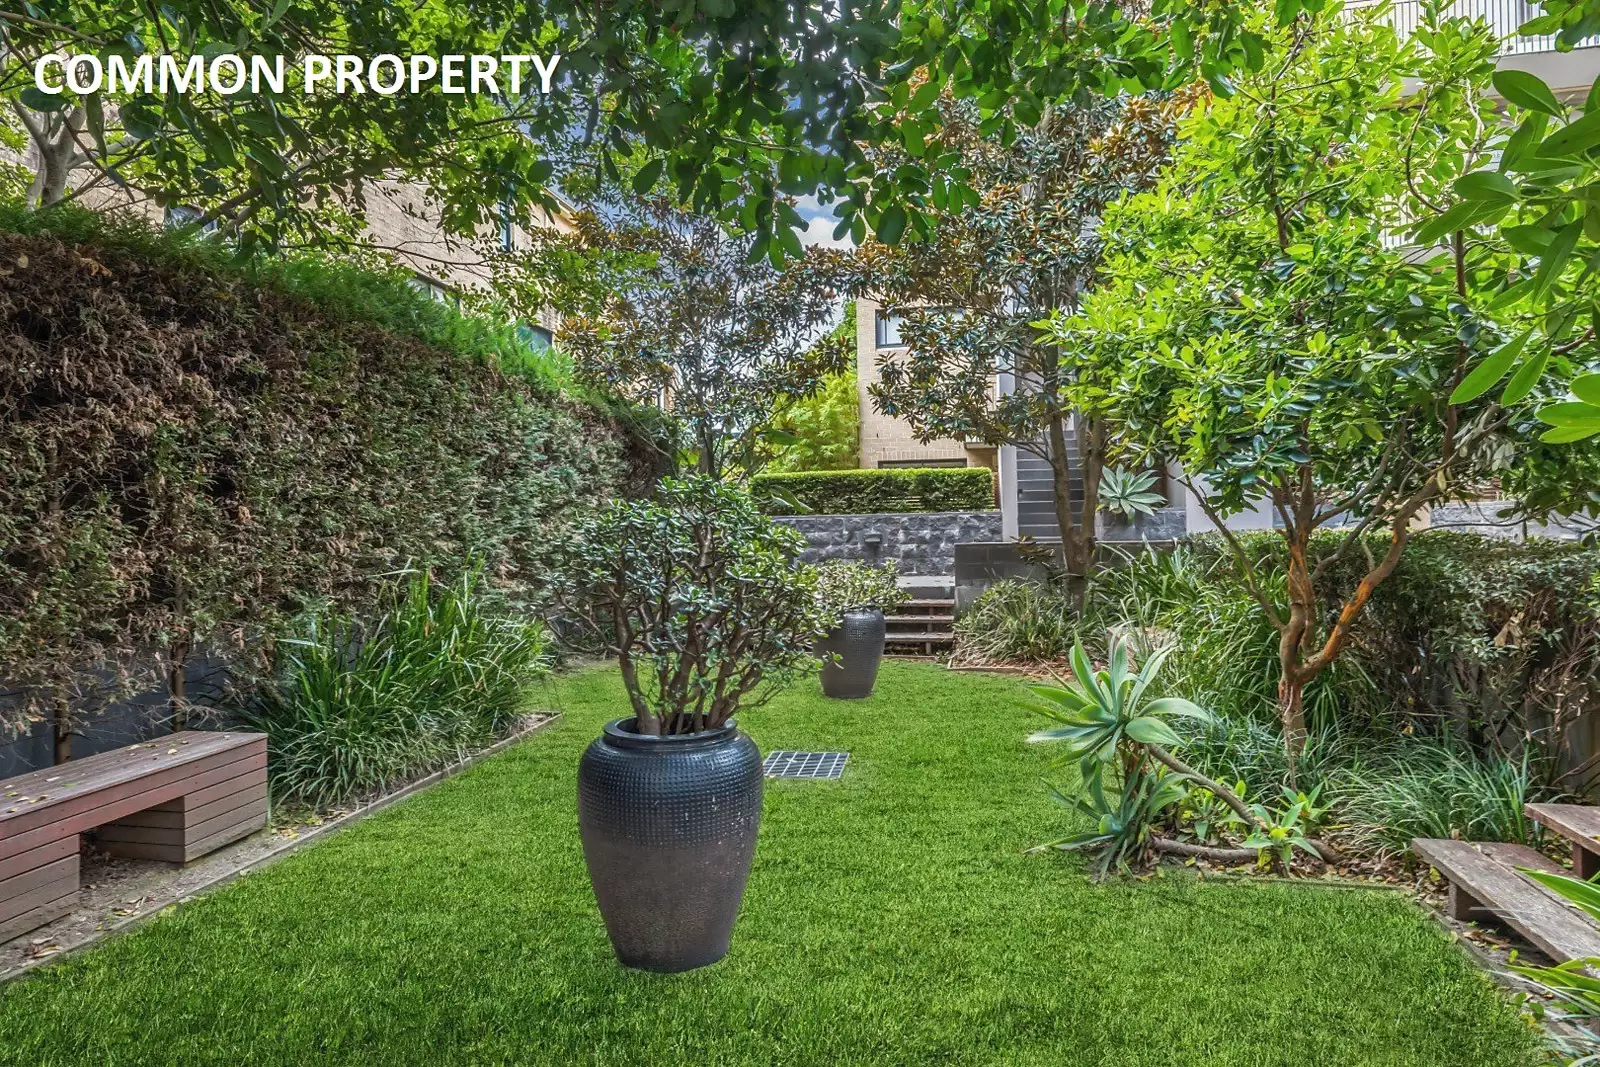 3/7-9 Alison Road, Kensington Auction by Sydney Sotheby's International Realty - image 8